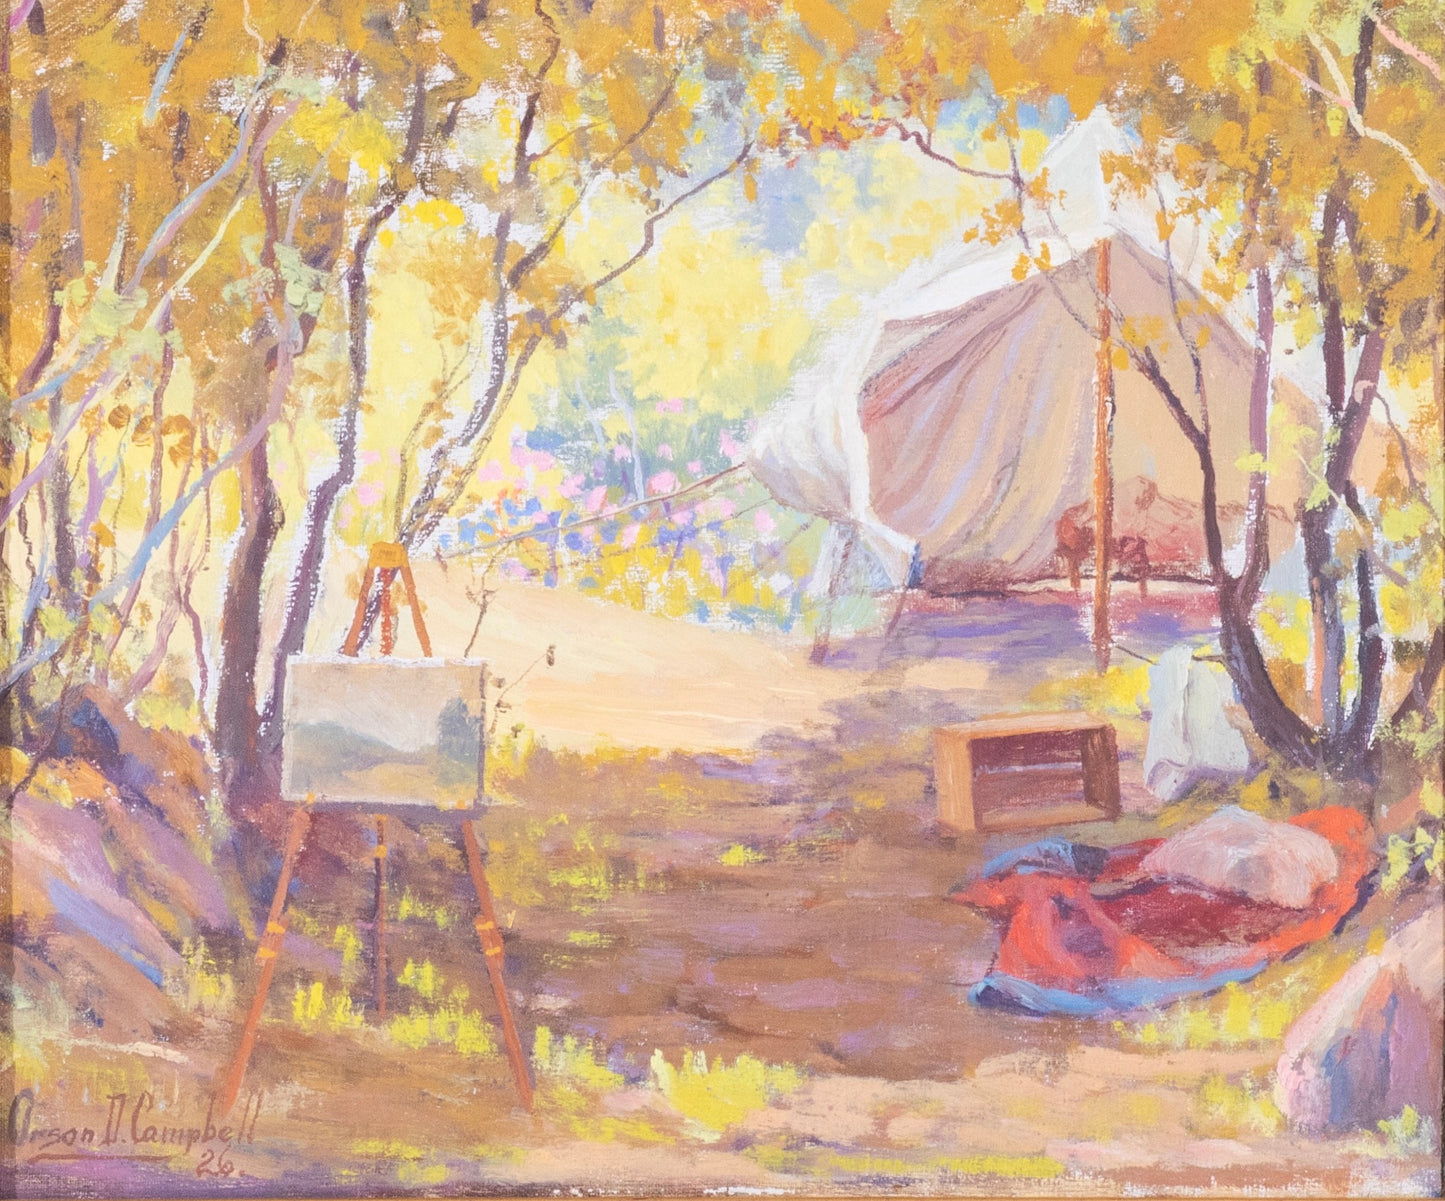 Orson D. Campbell - Untitled (Camp Scene with Easel) 1926 10.5" x 12.5"